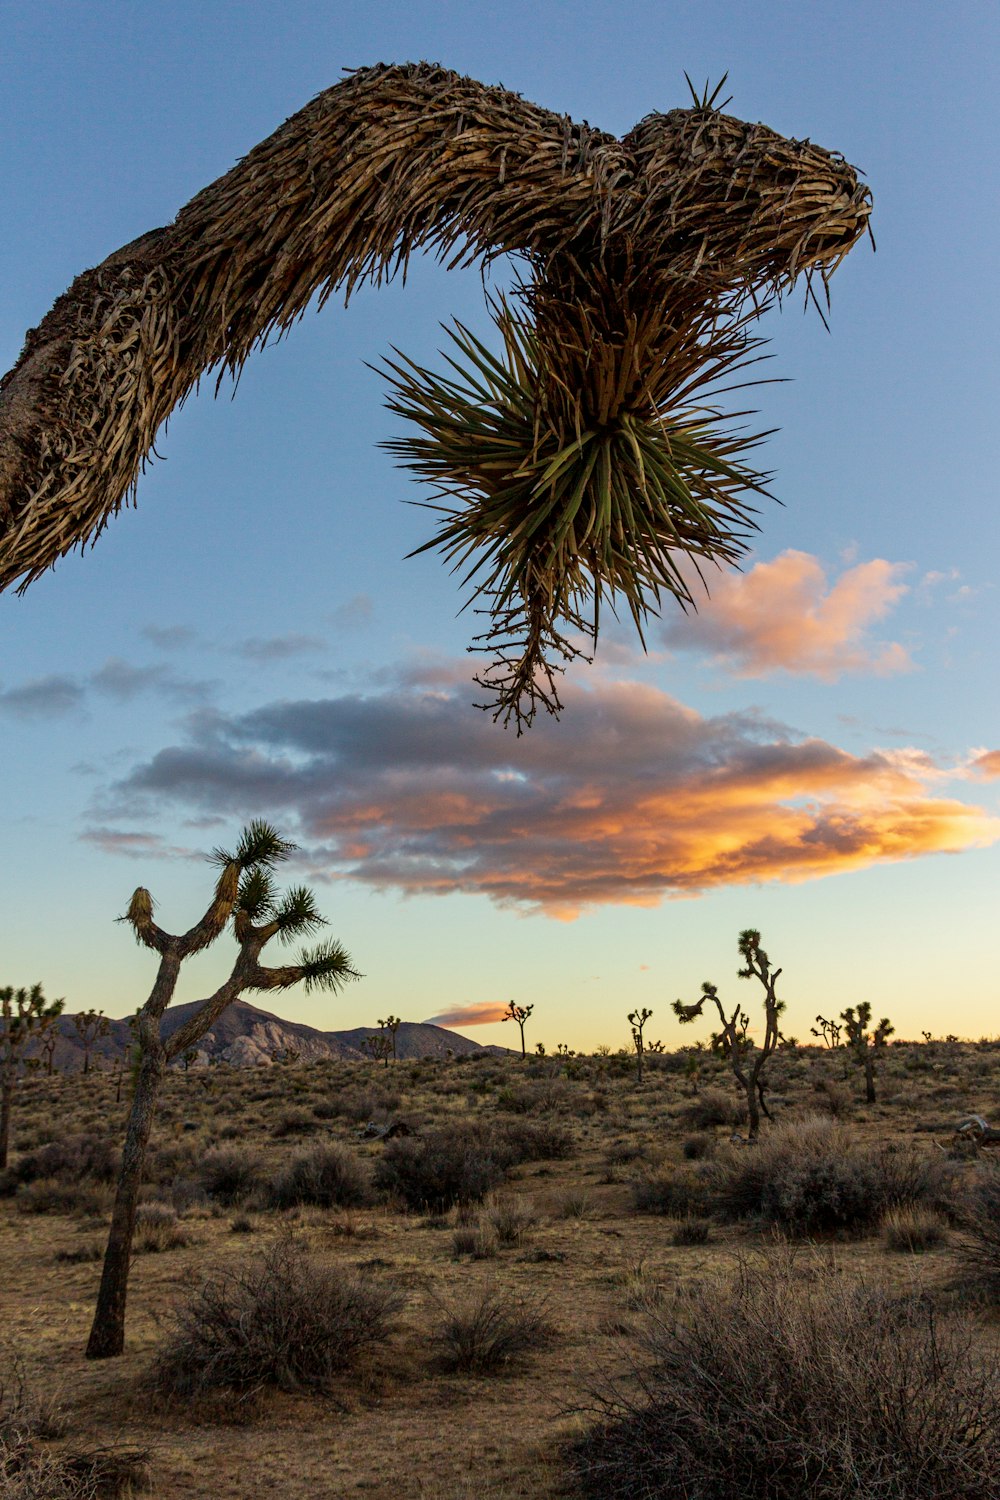 a joshua tree in the desert with a sunset in the background